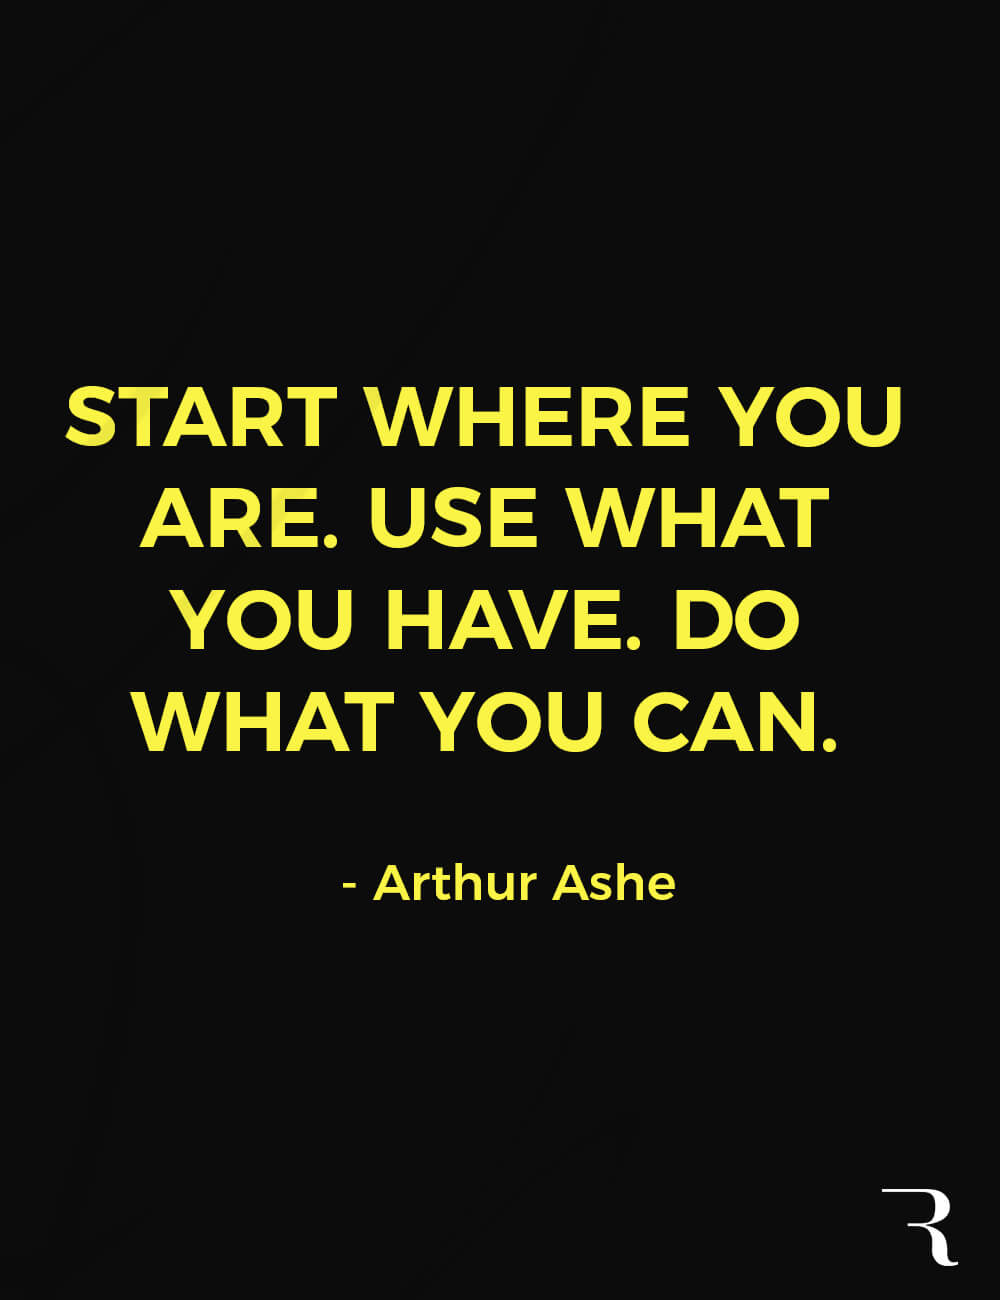 Motivational Quotes: “Start where you are. Use what you have. Do what you can.” 112 Motivational Quotes to Be a Better Entrepreneur